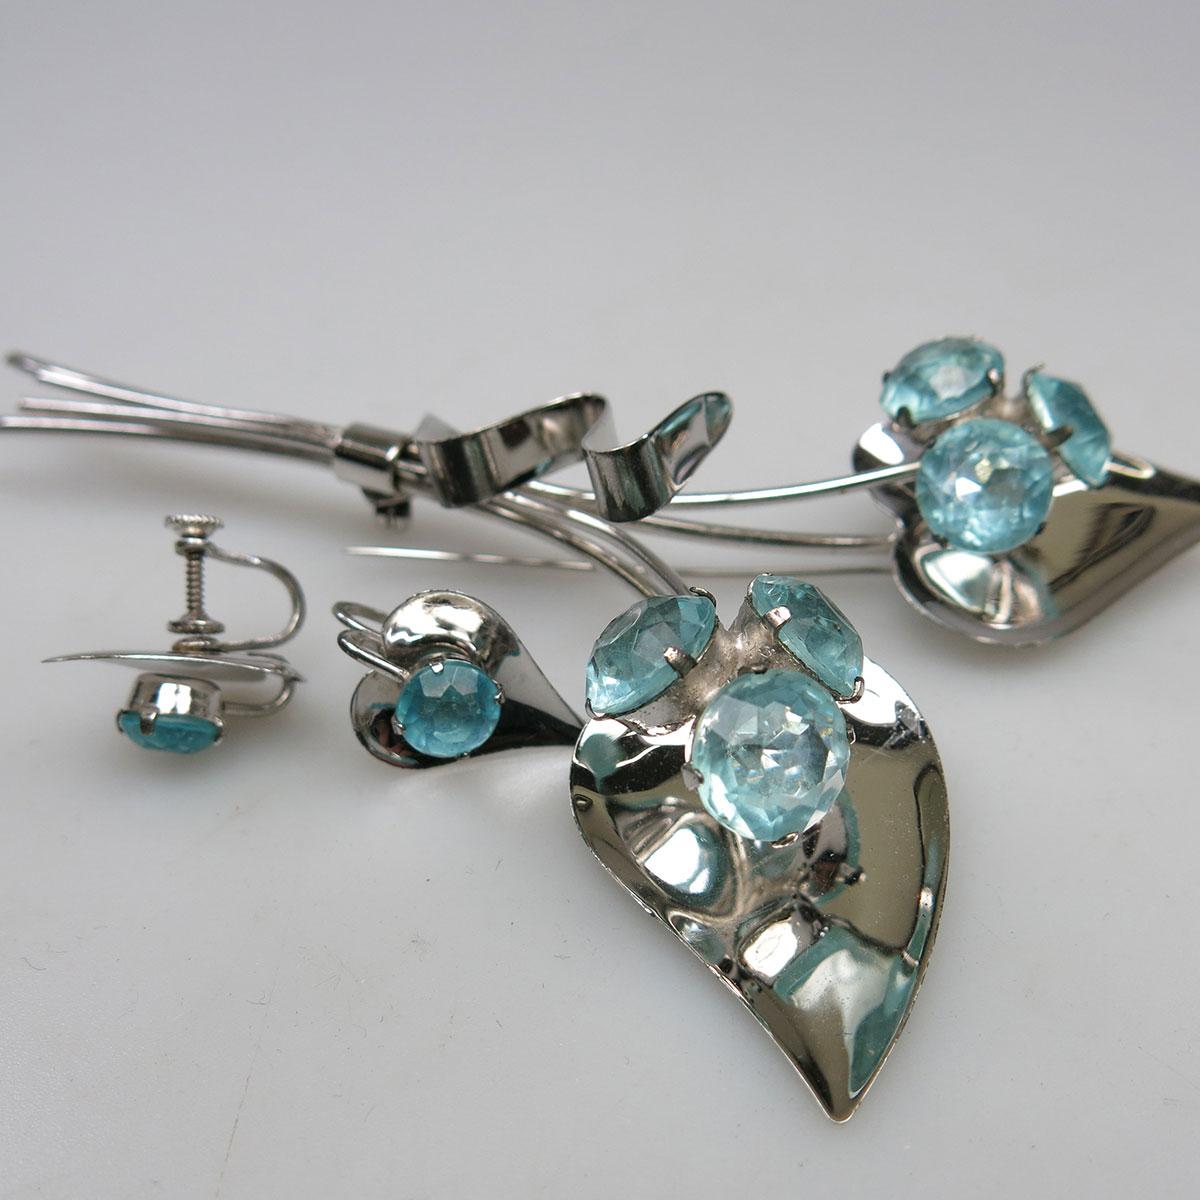 Artco Sterling Silver Floral Spray Brooch And Earrings